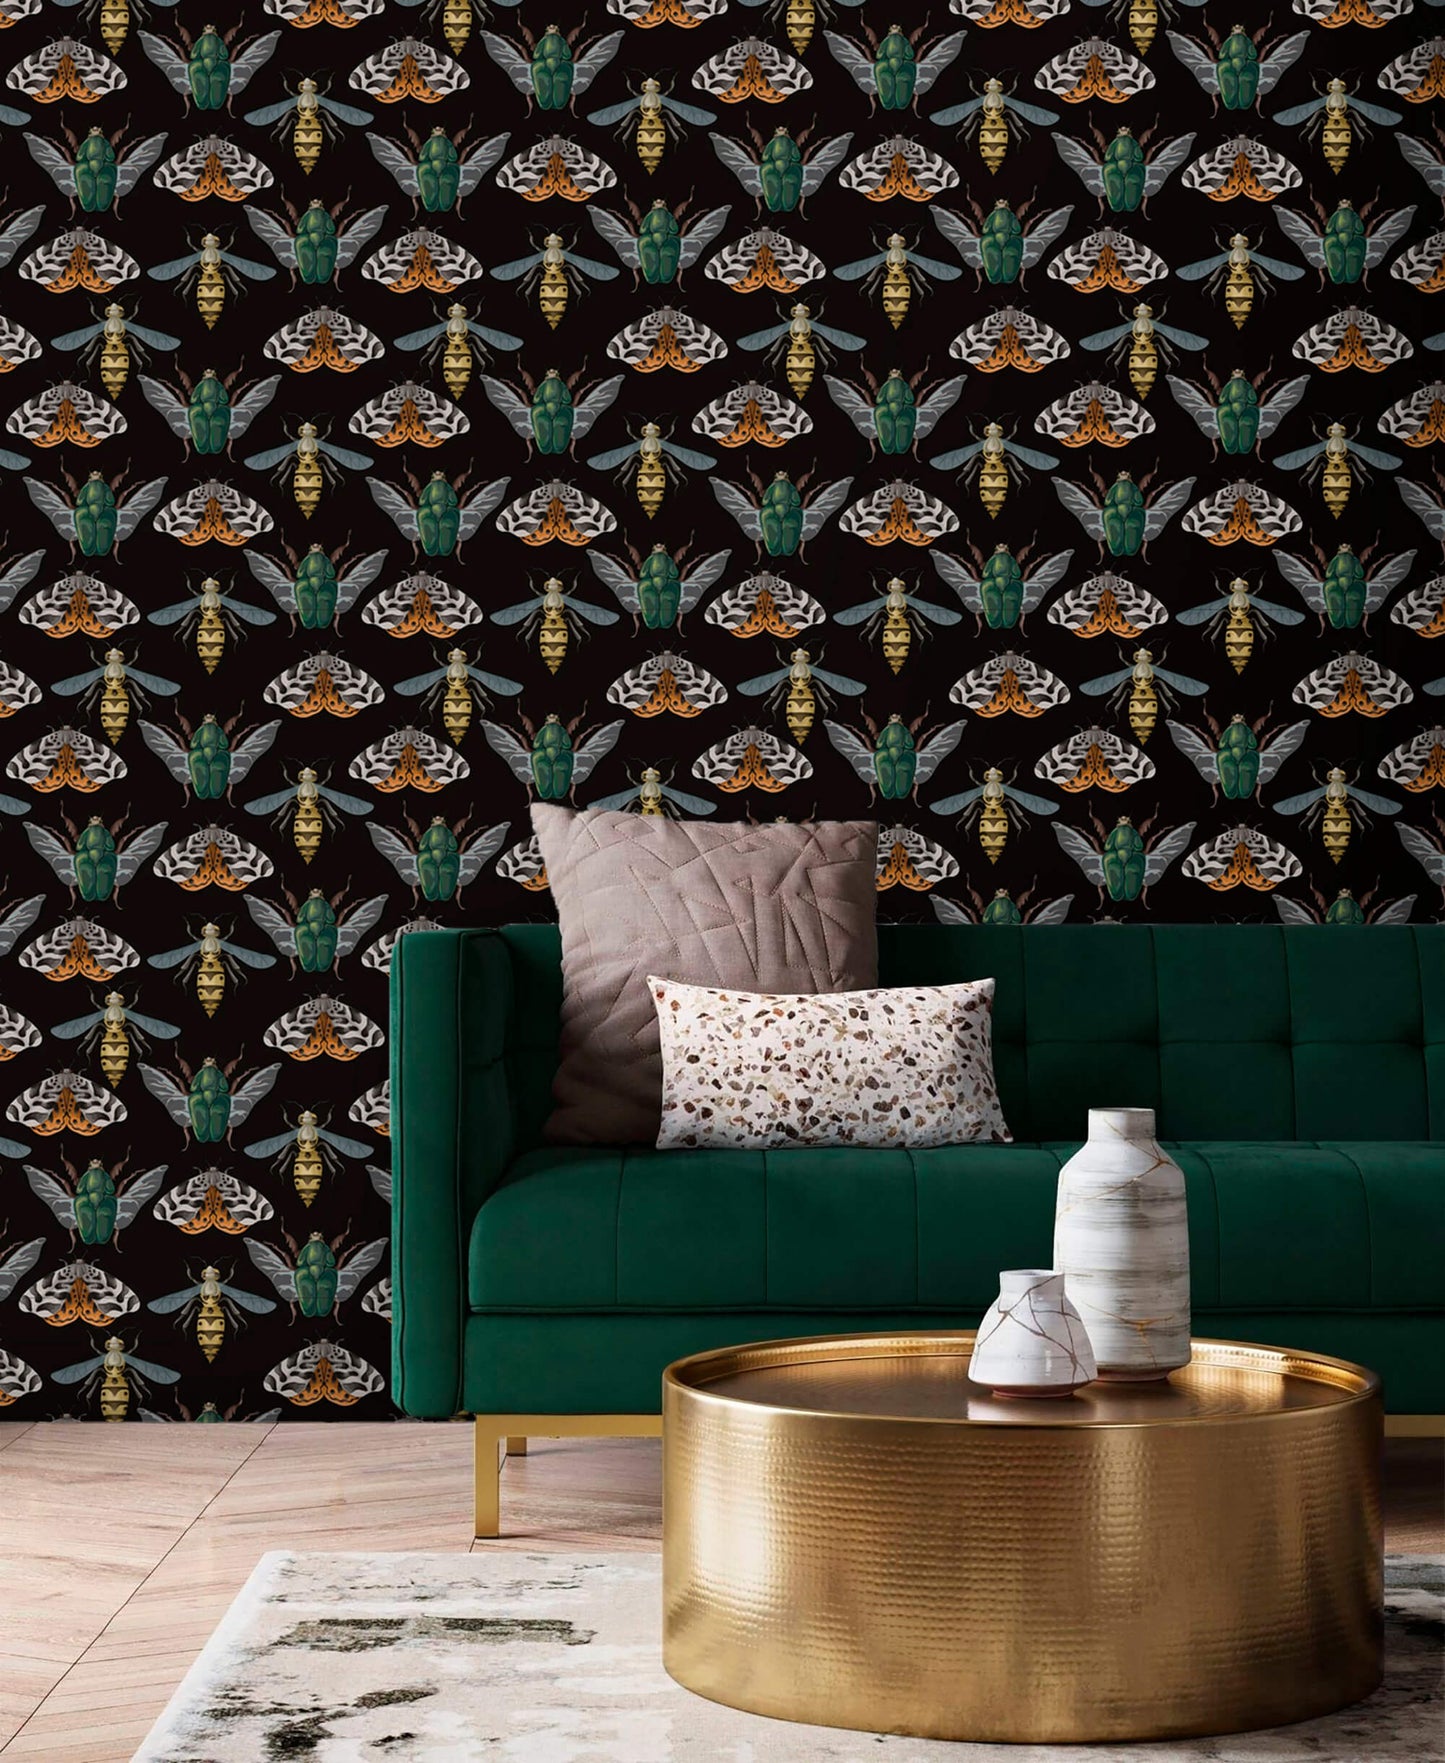 Insect Harmony Wallpaper: Bring the beauty of nature indoors with this whimsical design, featuring a symphony of insects amidst lush foliage, adding a touch of charm and wonder to your space